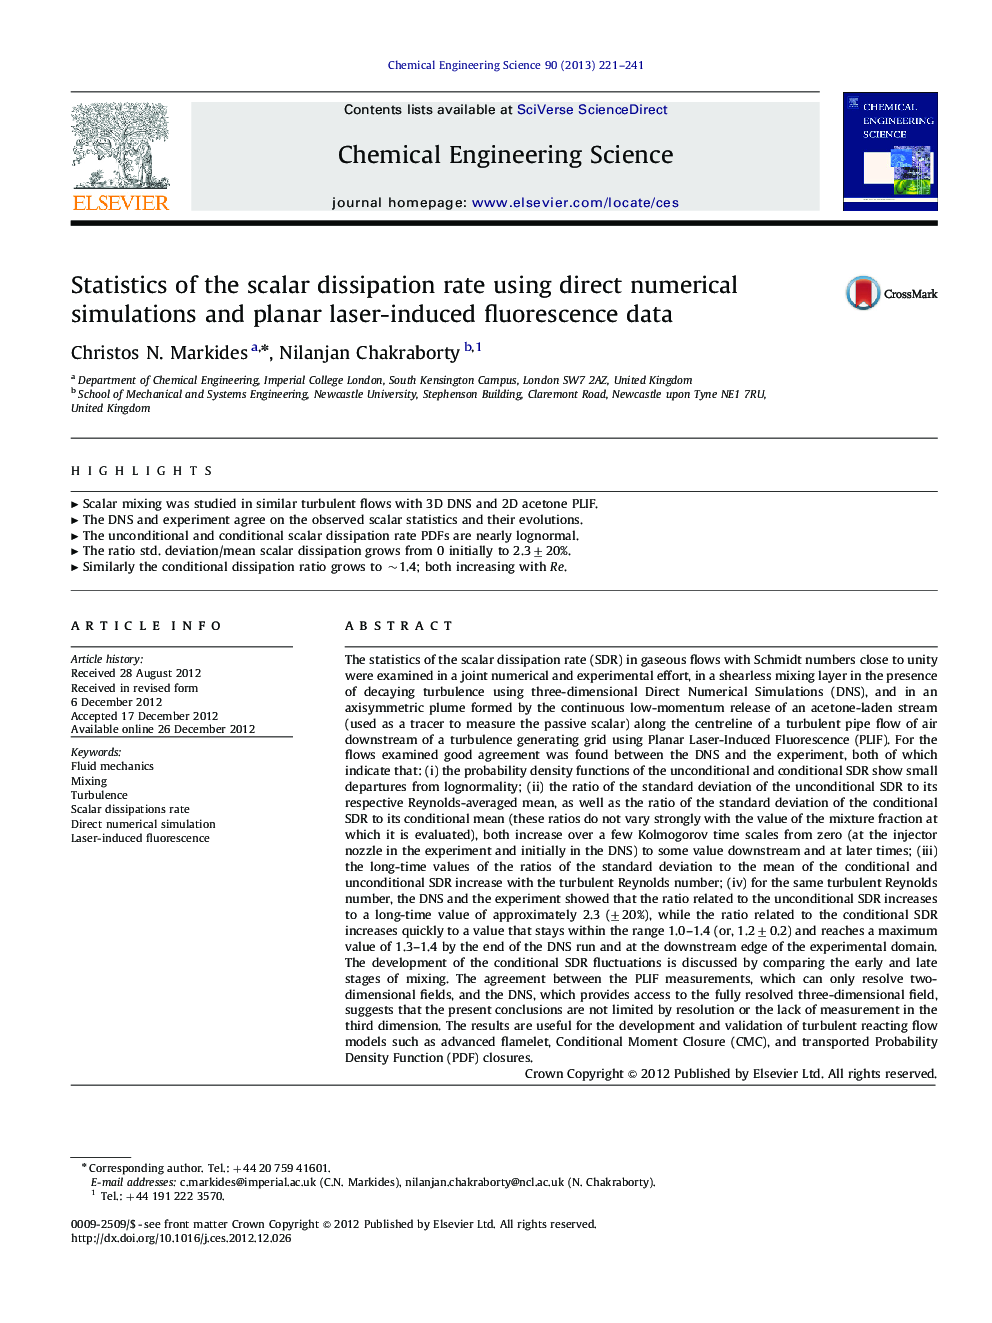 Statistics of the scalar dissipation rate using direct numerical simulations and planar laser-induced fluorescence data